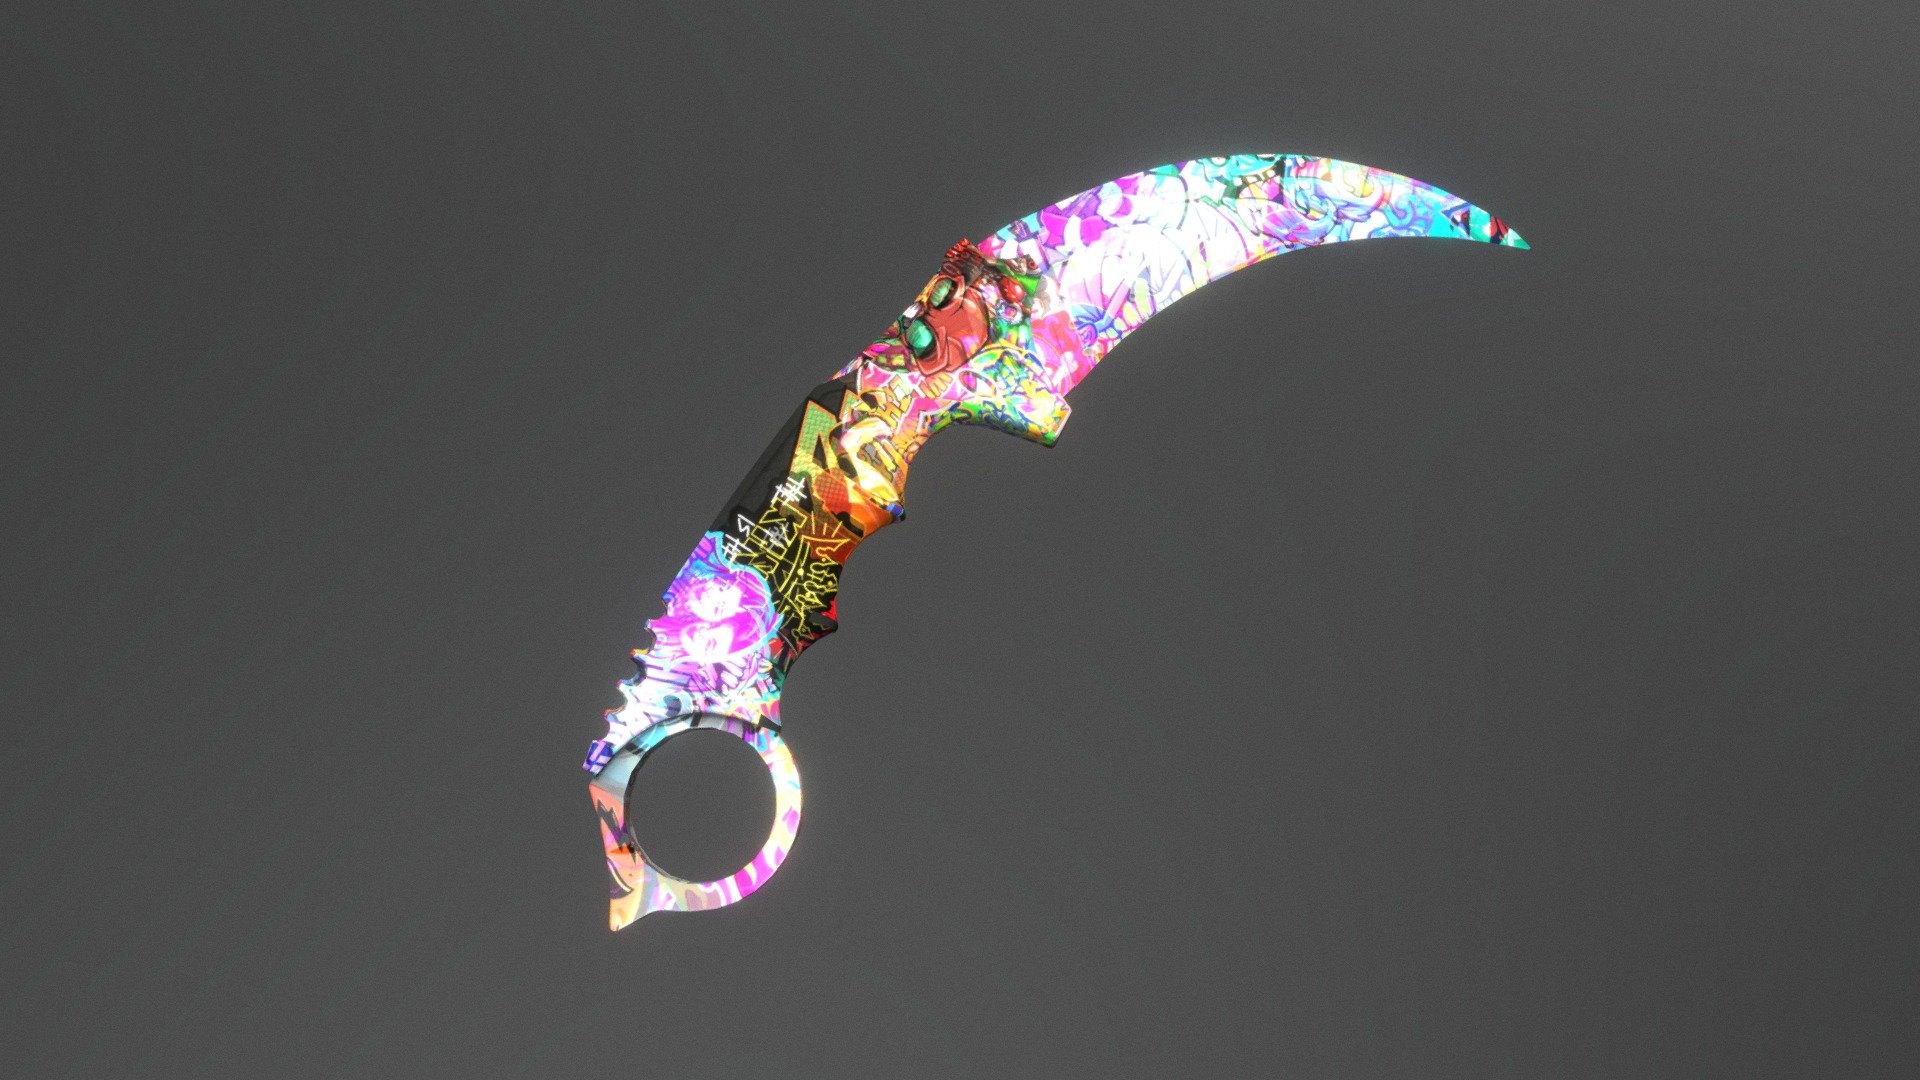 karambit knife from standoff2 with all stickers applied in a sticker bomb style. Enjoy! - Karambit - Sticker Shock - Download Free 3D model by quin.robinson253 3d model